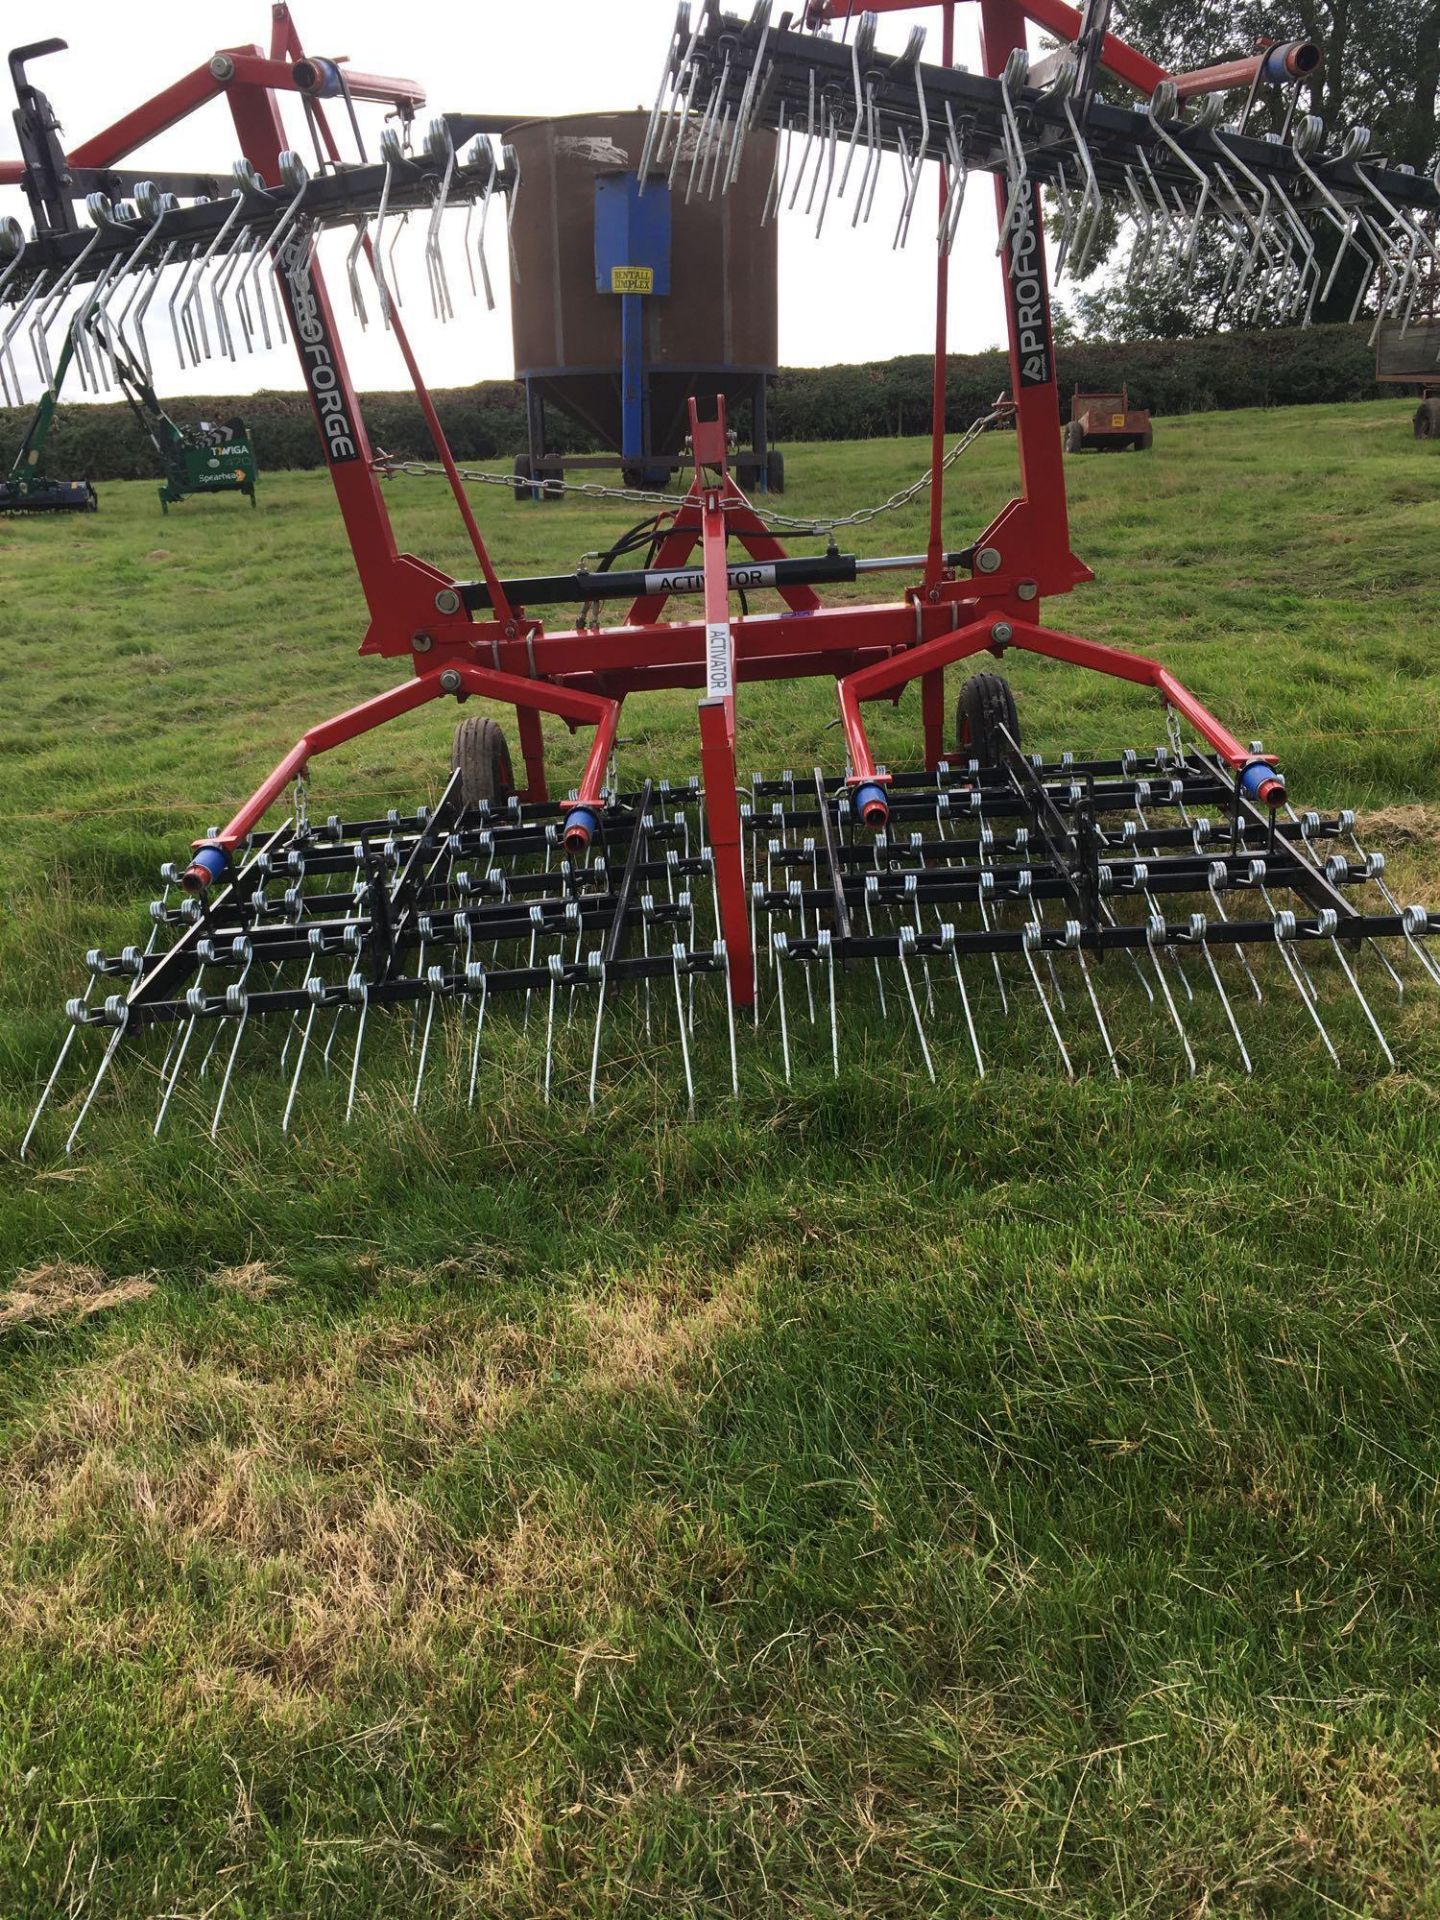 2017 Proforge Activator 6m grass harrows. Brand new. Serial: 2571 - Image 3 of 7